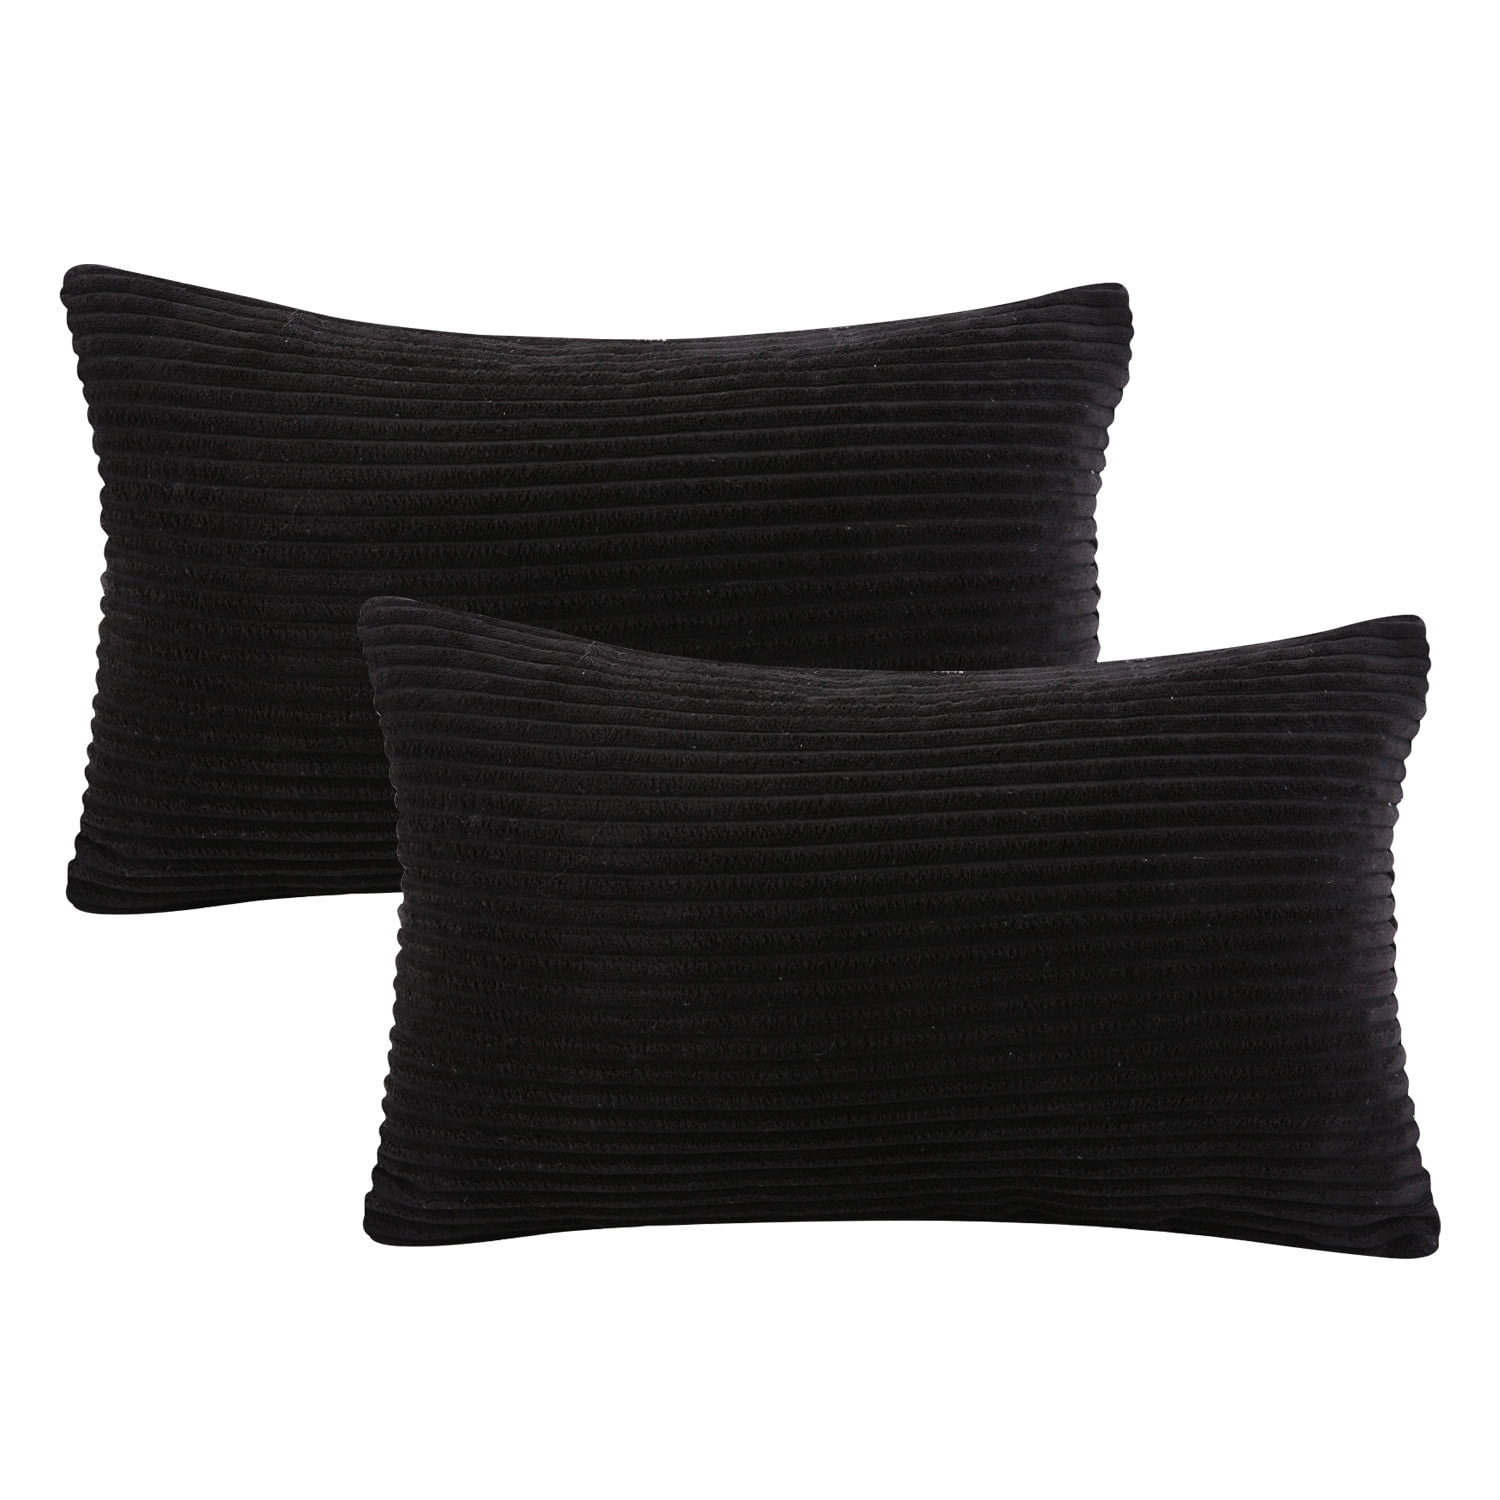 Fluffy Corduroy Velvet Solid Color Suqare Cusion Accent Decorative Throw  Pillow for Couch, 12 x 20, Black, 2 Pack 